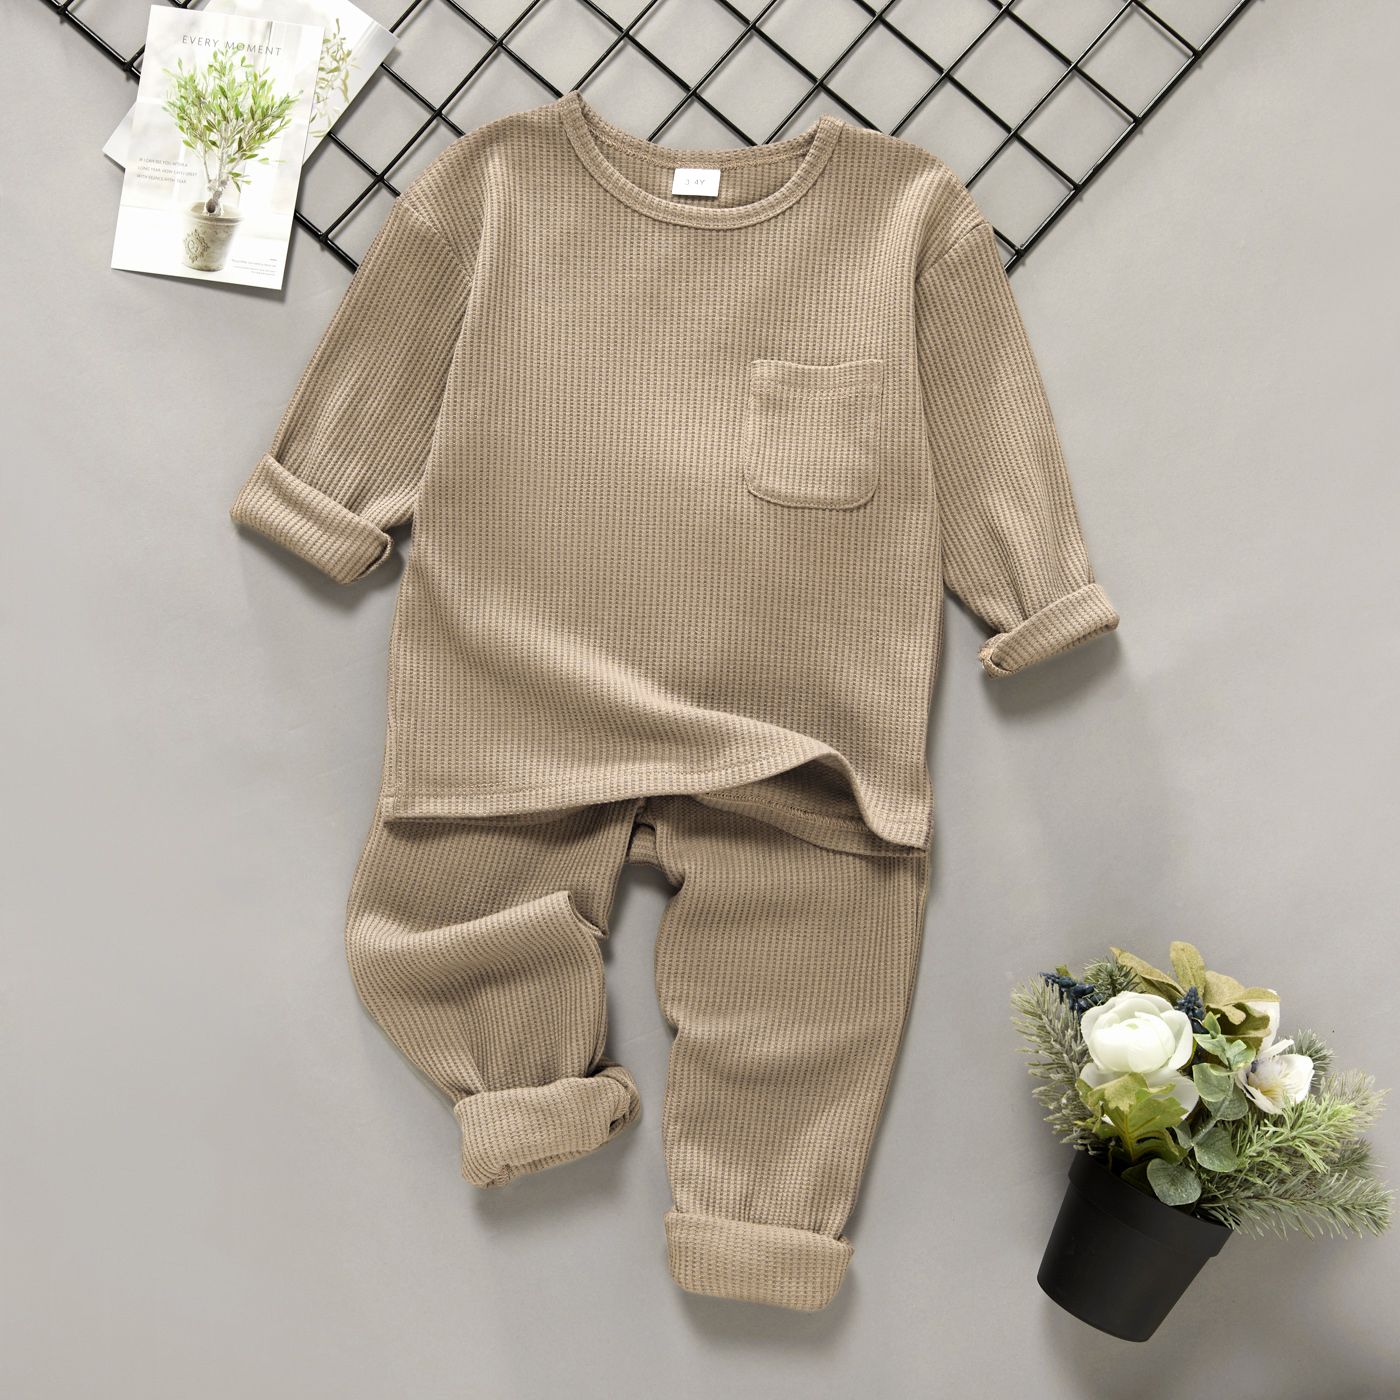 2-piece Toddler Boy/Girl Round-collar Long-sleeve Ribbed Solid Top with Pocket and Elasticized Pants